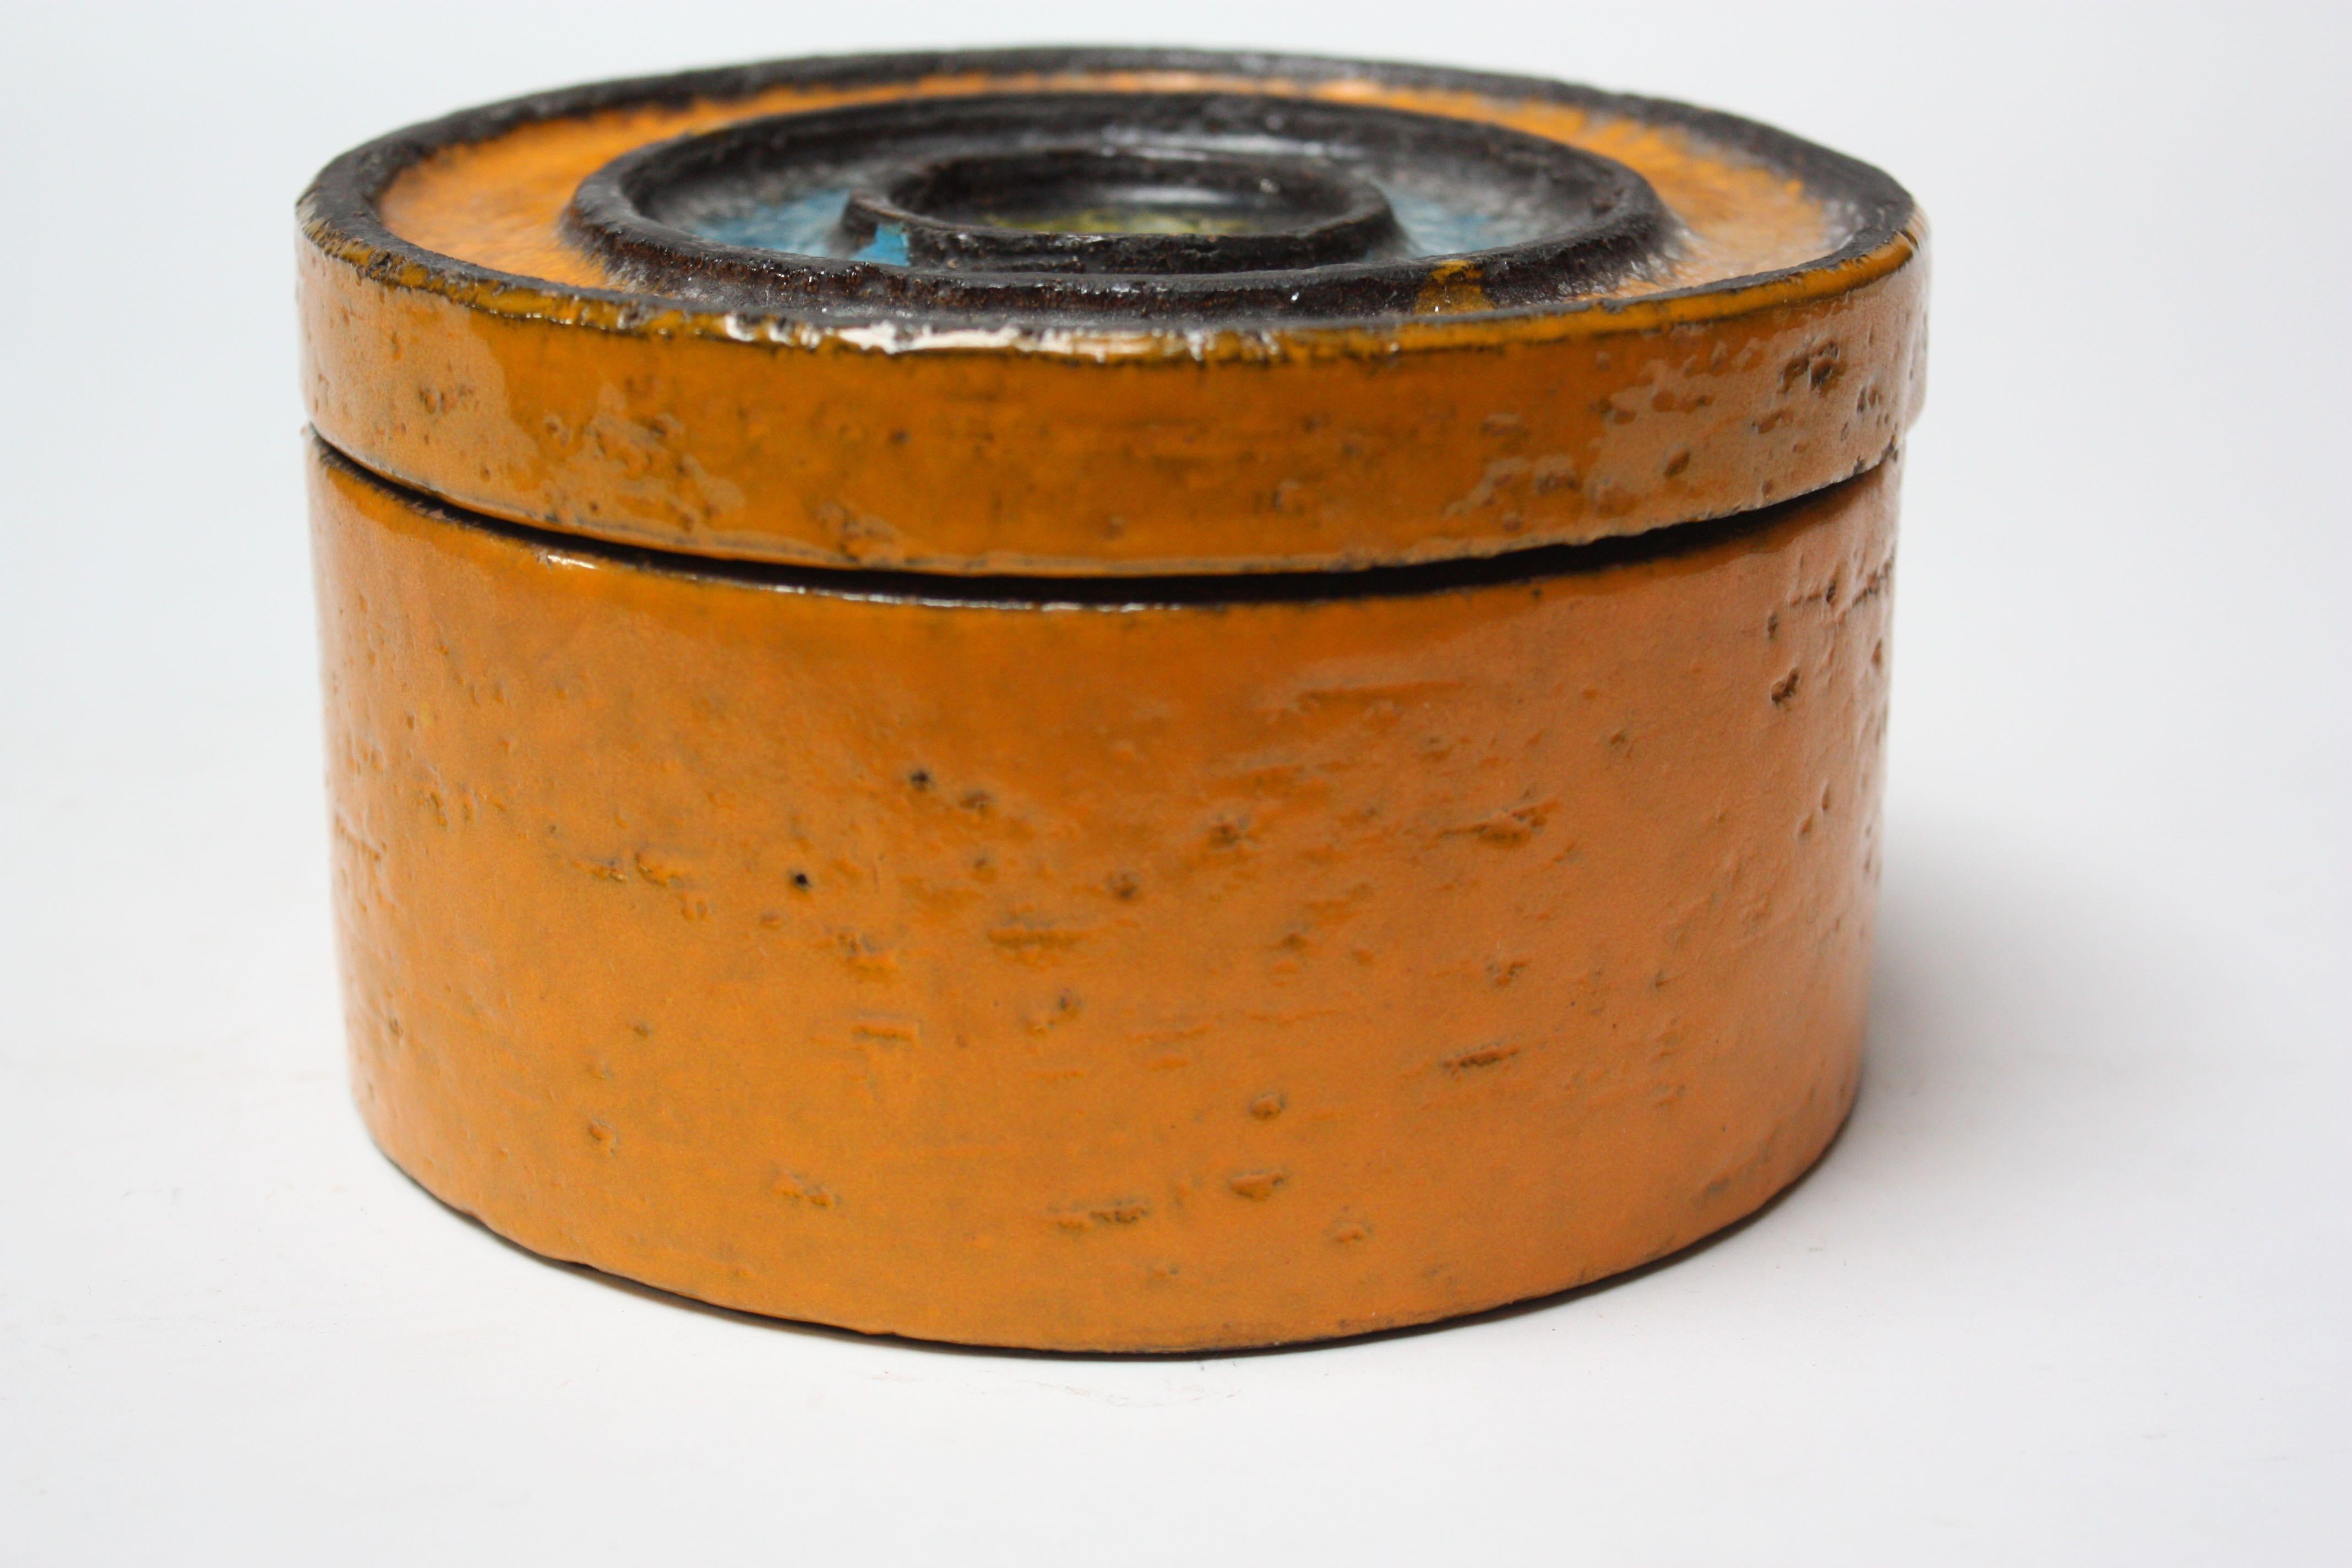 This 1960s Italian ceramic lidded jar is a gorgeous combination of chartreuse, sky blue, charcoal, and burnt orange. The glaze used on the top of the lid creates a 'glass' or 'crystal-like' appearance and makes for a nice contrast to the matte glaze